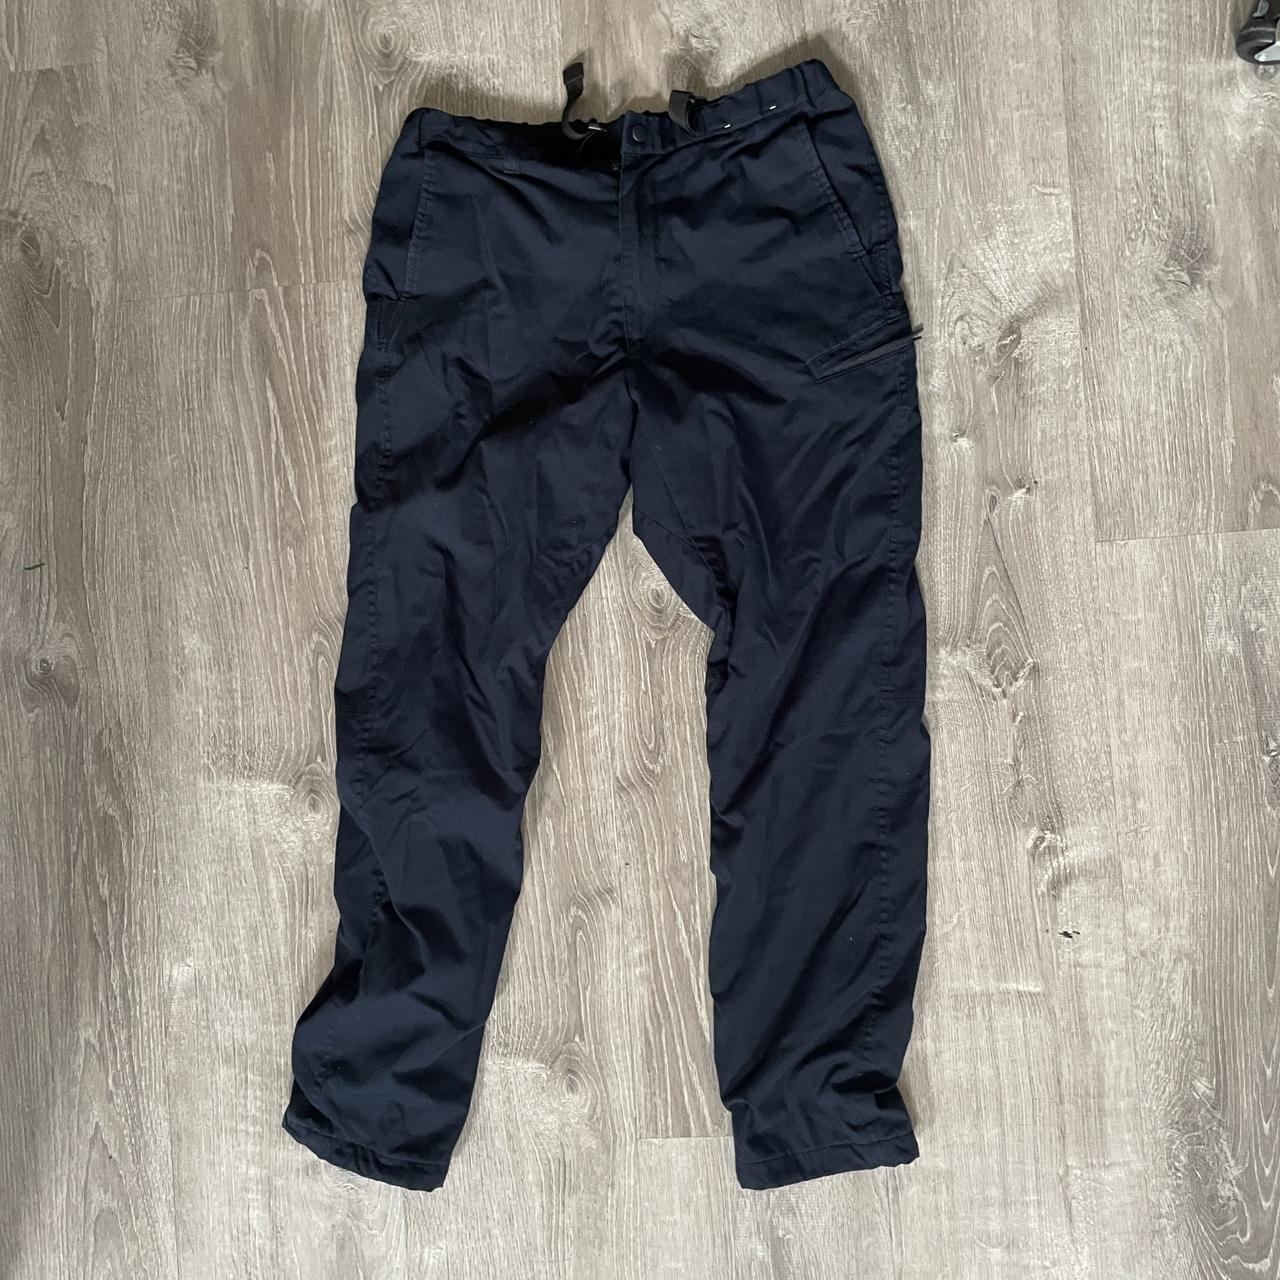 UNIQLO Men's Navy and Blue Joggers-tracksuits | Depop